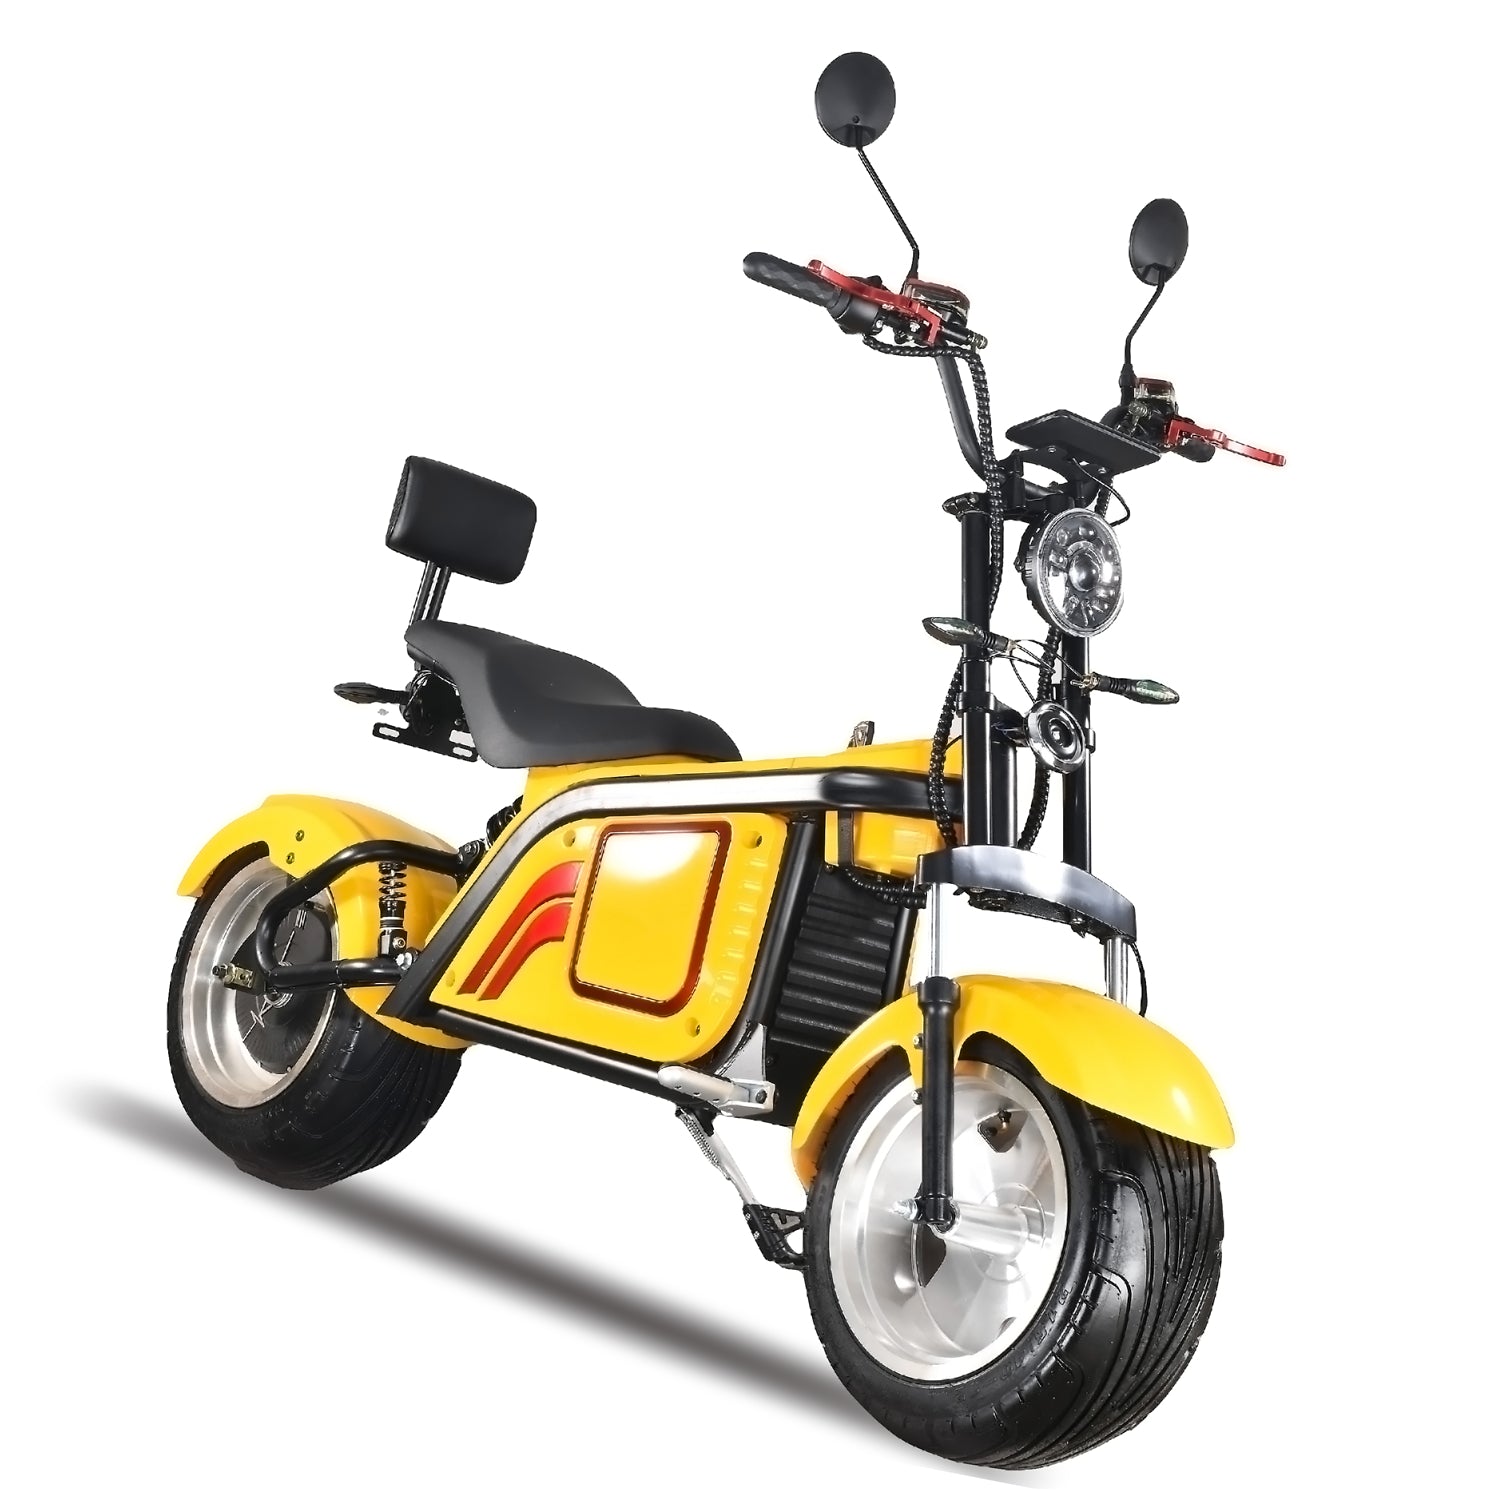 New Disc Brake Electric Scooters EEC/COC Citycoco 1500W/2000W/3000W Electric Bike Steel Frame For Men Electric Motorcycles | Electrr Inc